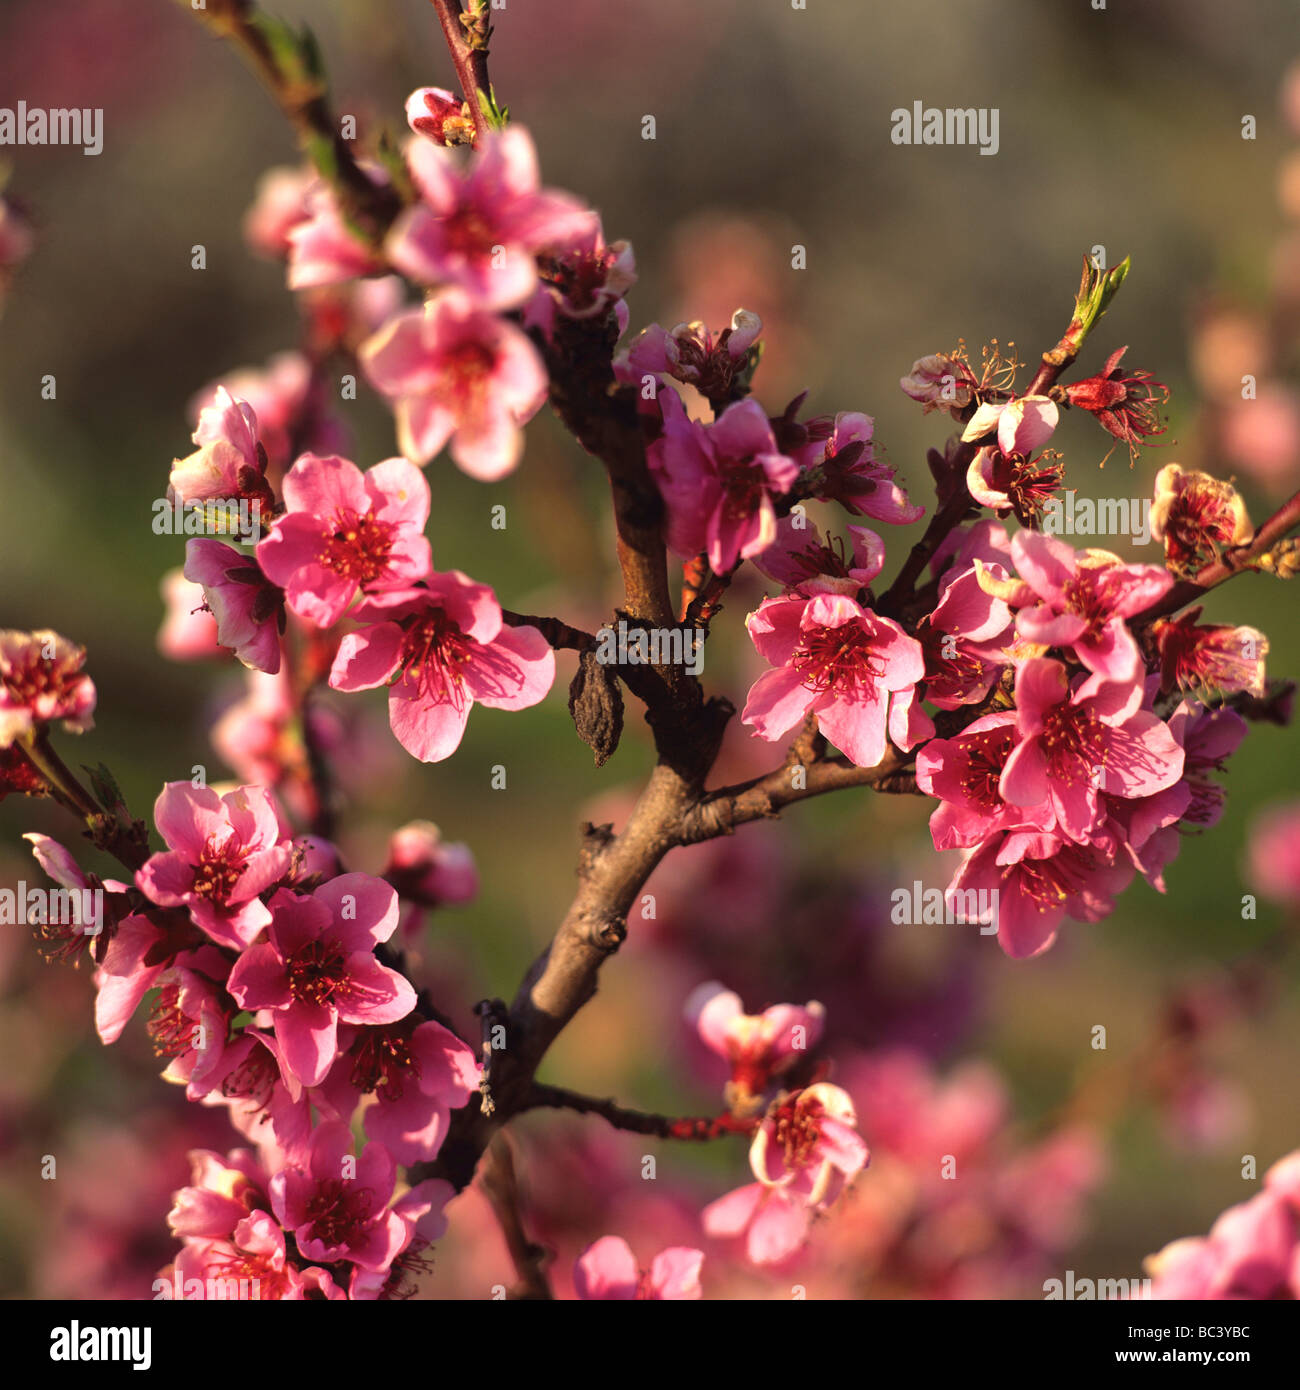 Flowers of fruit tree in flowering  in close up. Stock Photo